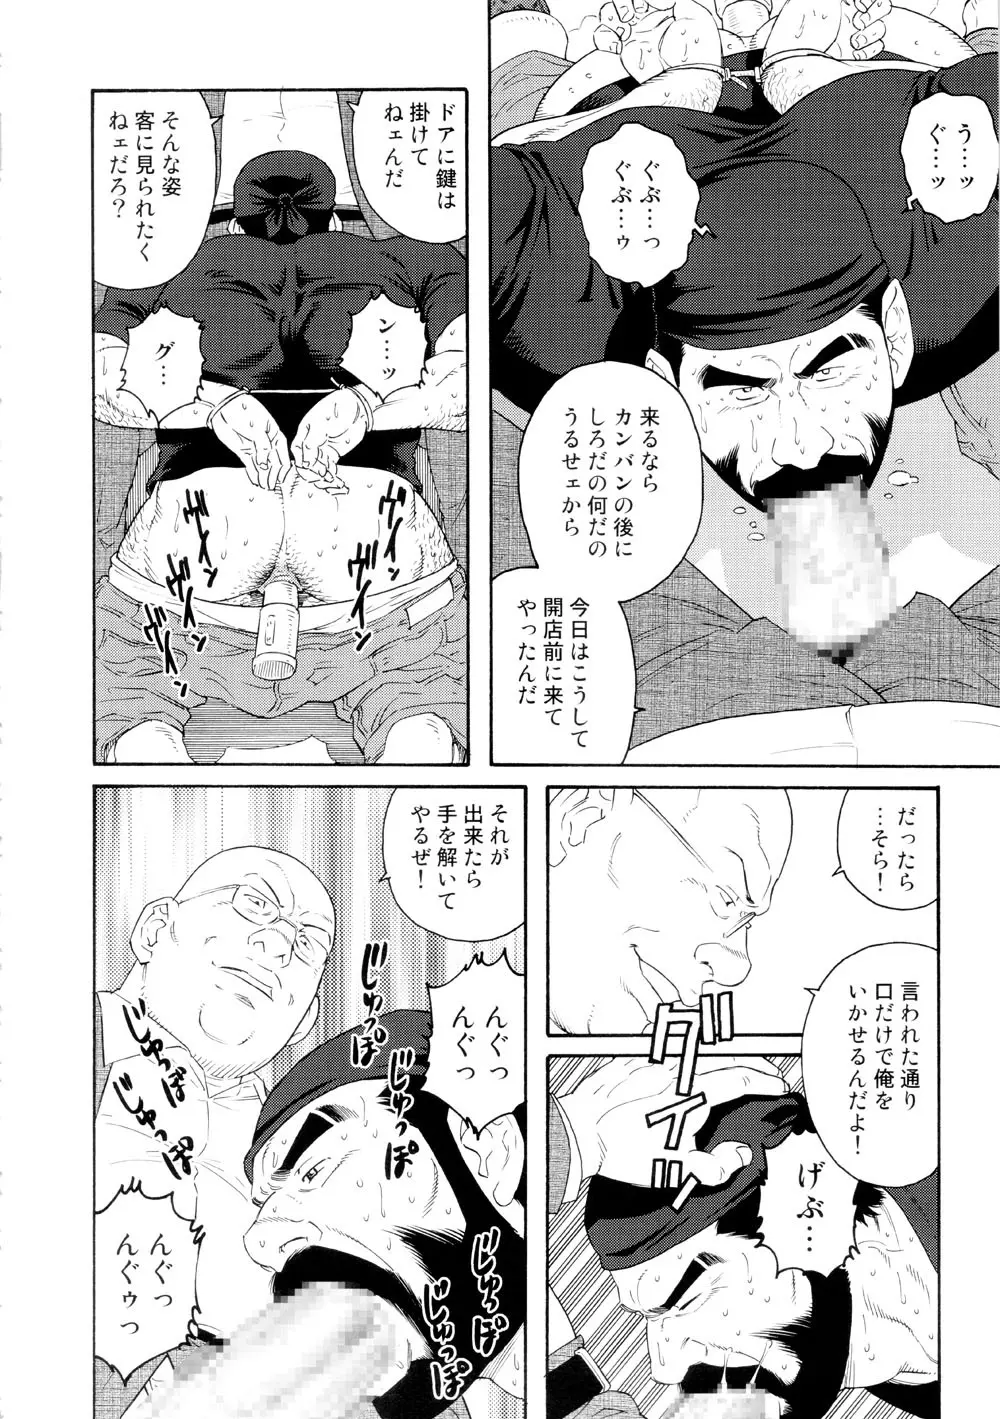 Genryu Chapter 3 Page.2